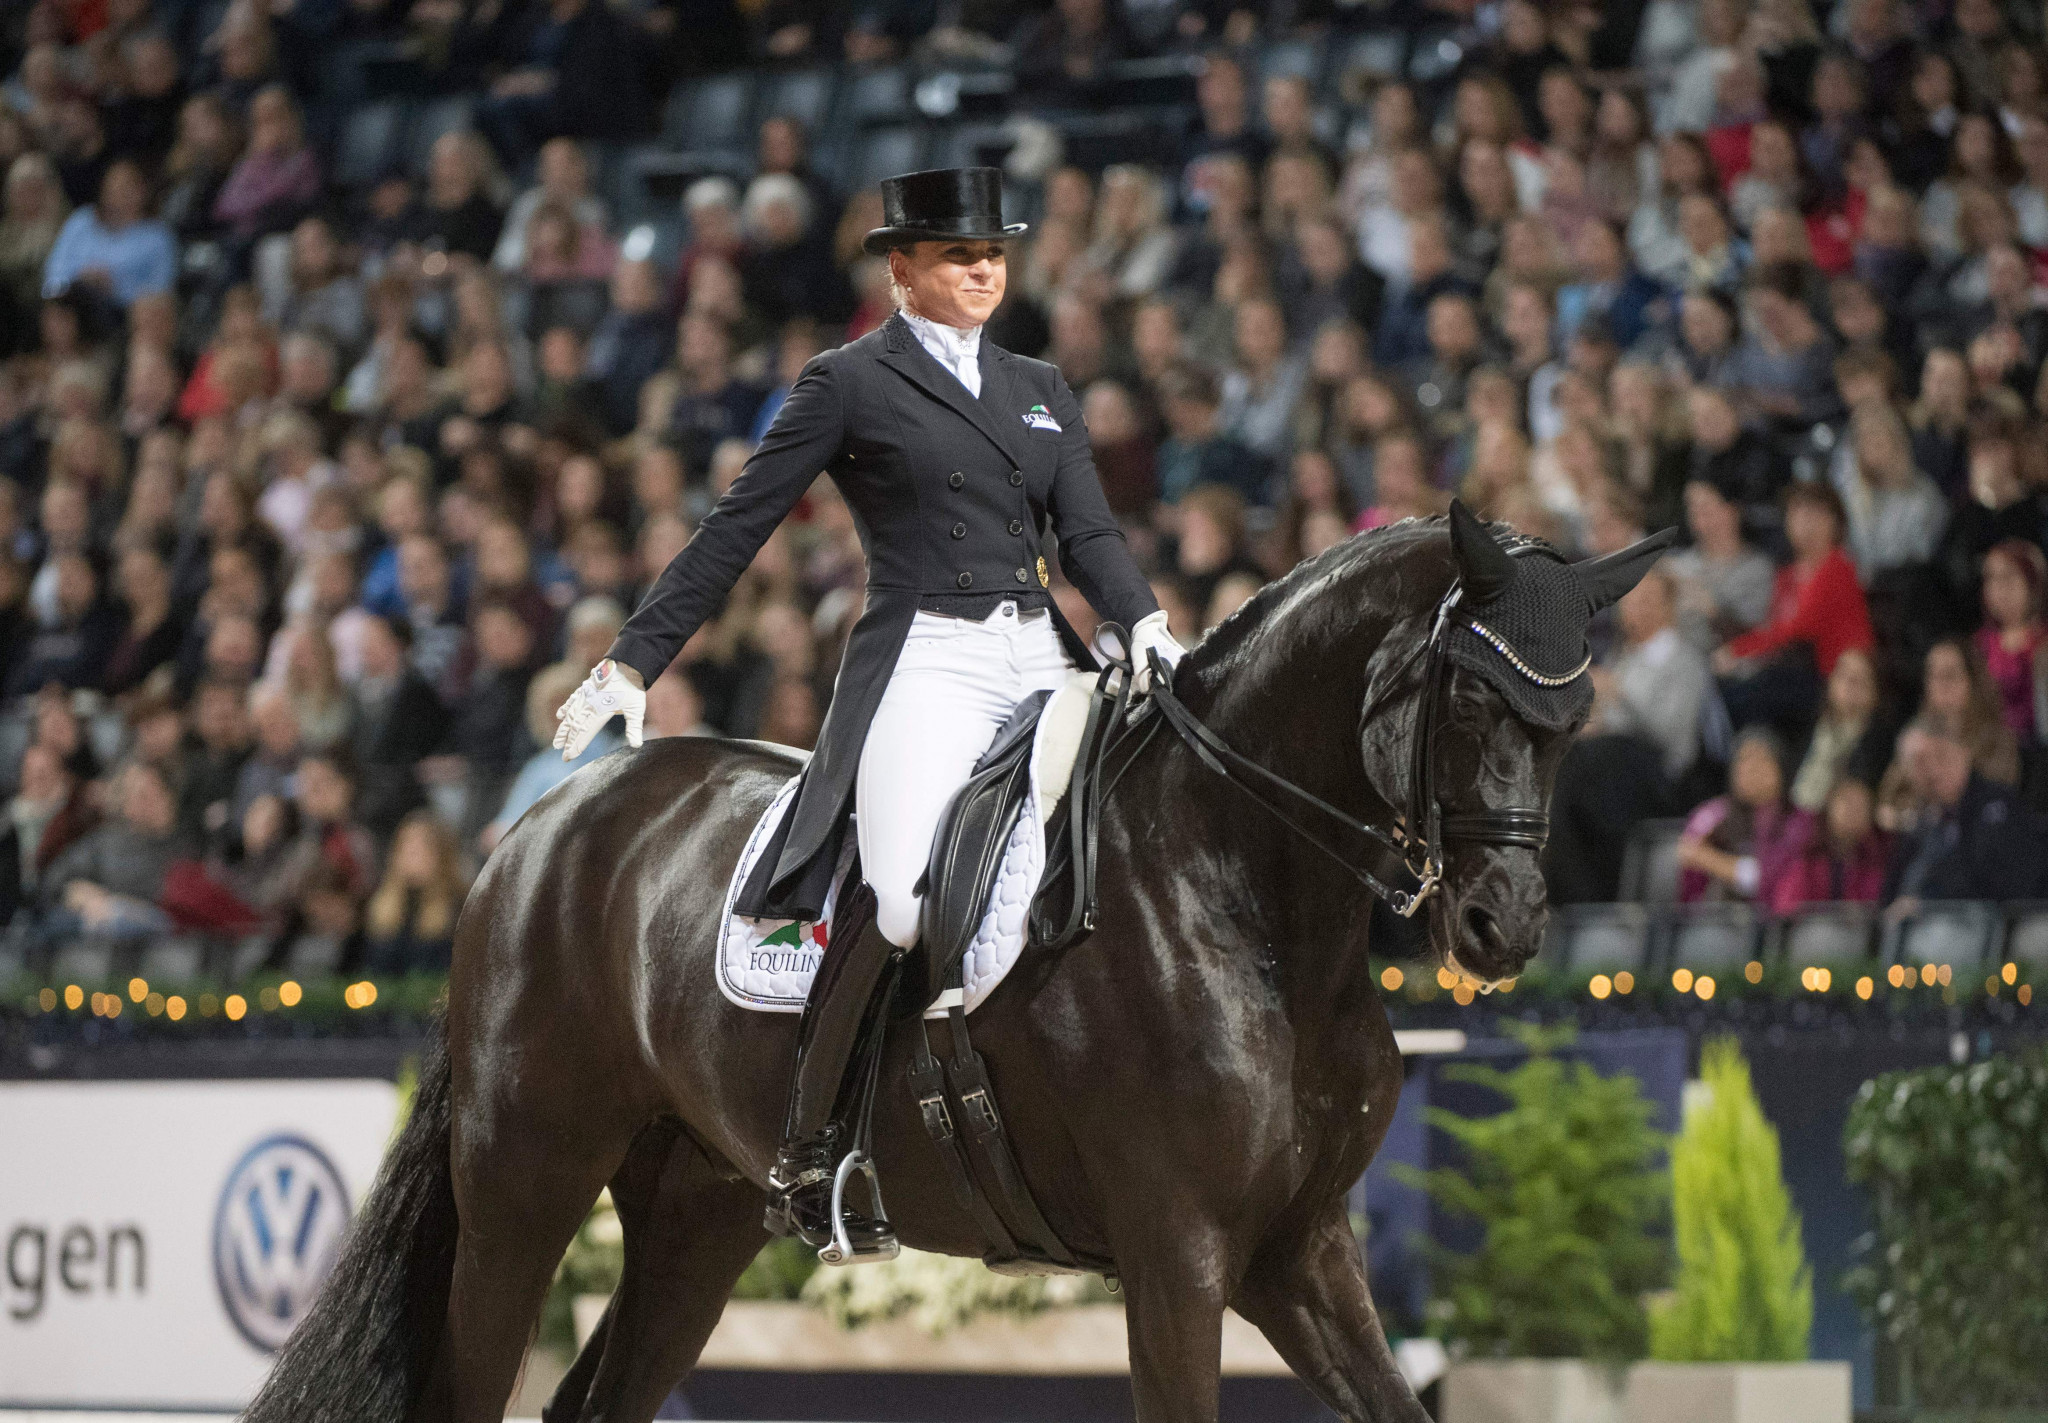 Germany's Benjamin Werndl is second in the FEI dressage rankings, behind compatriot Dorothee Schneider ©Getty Images